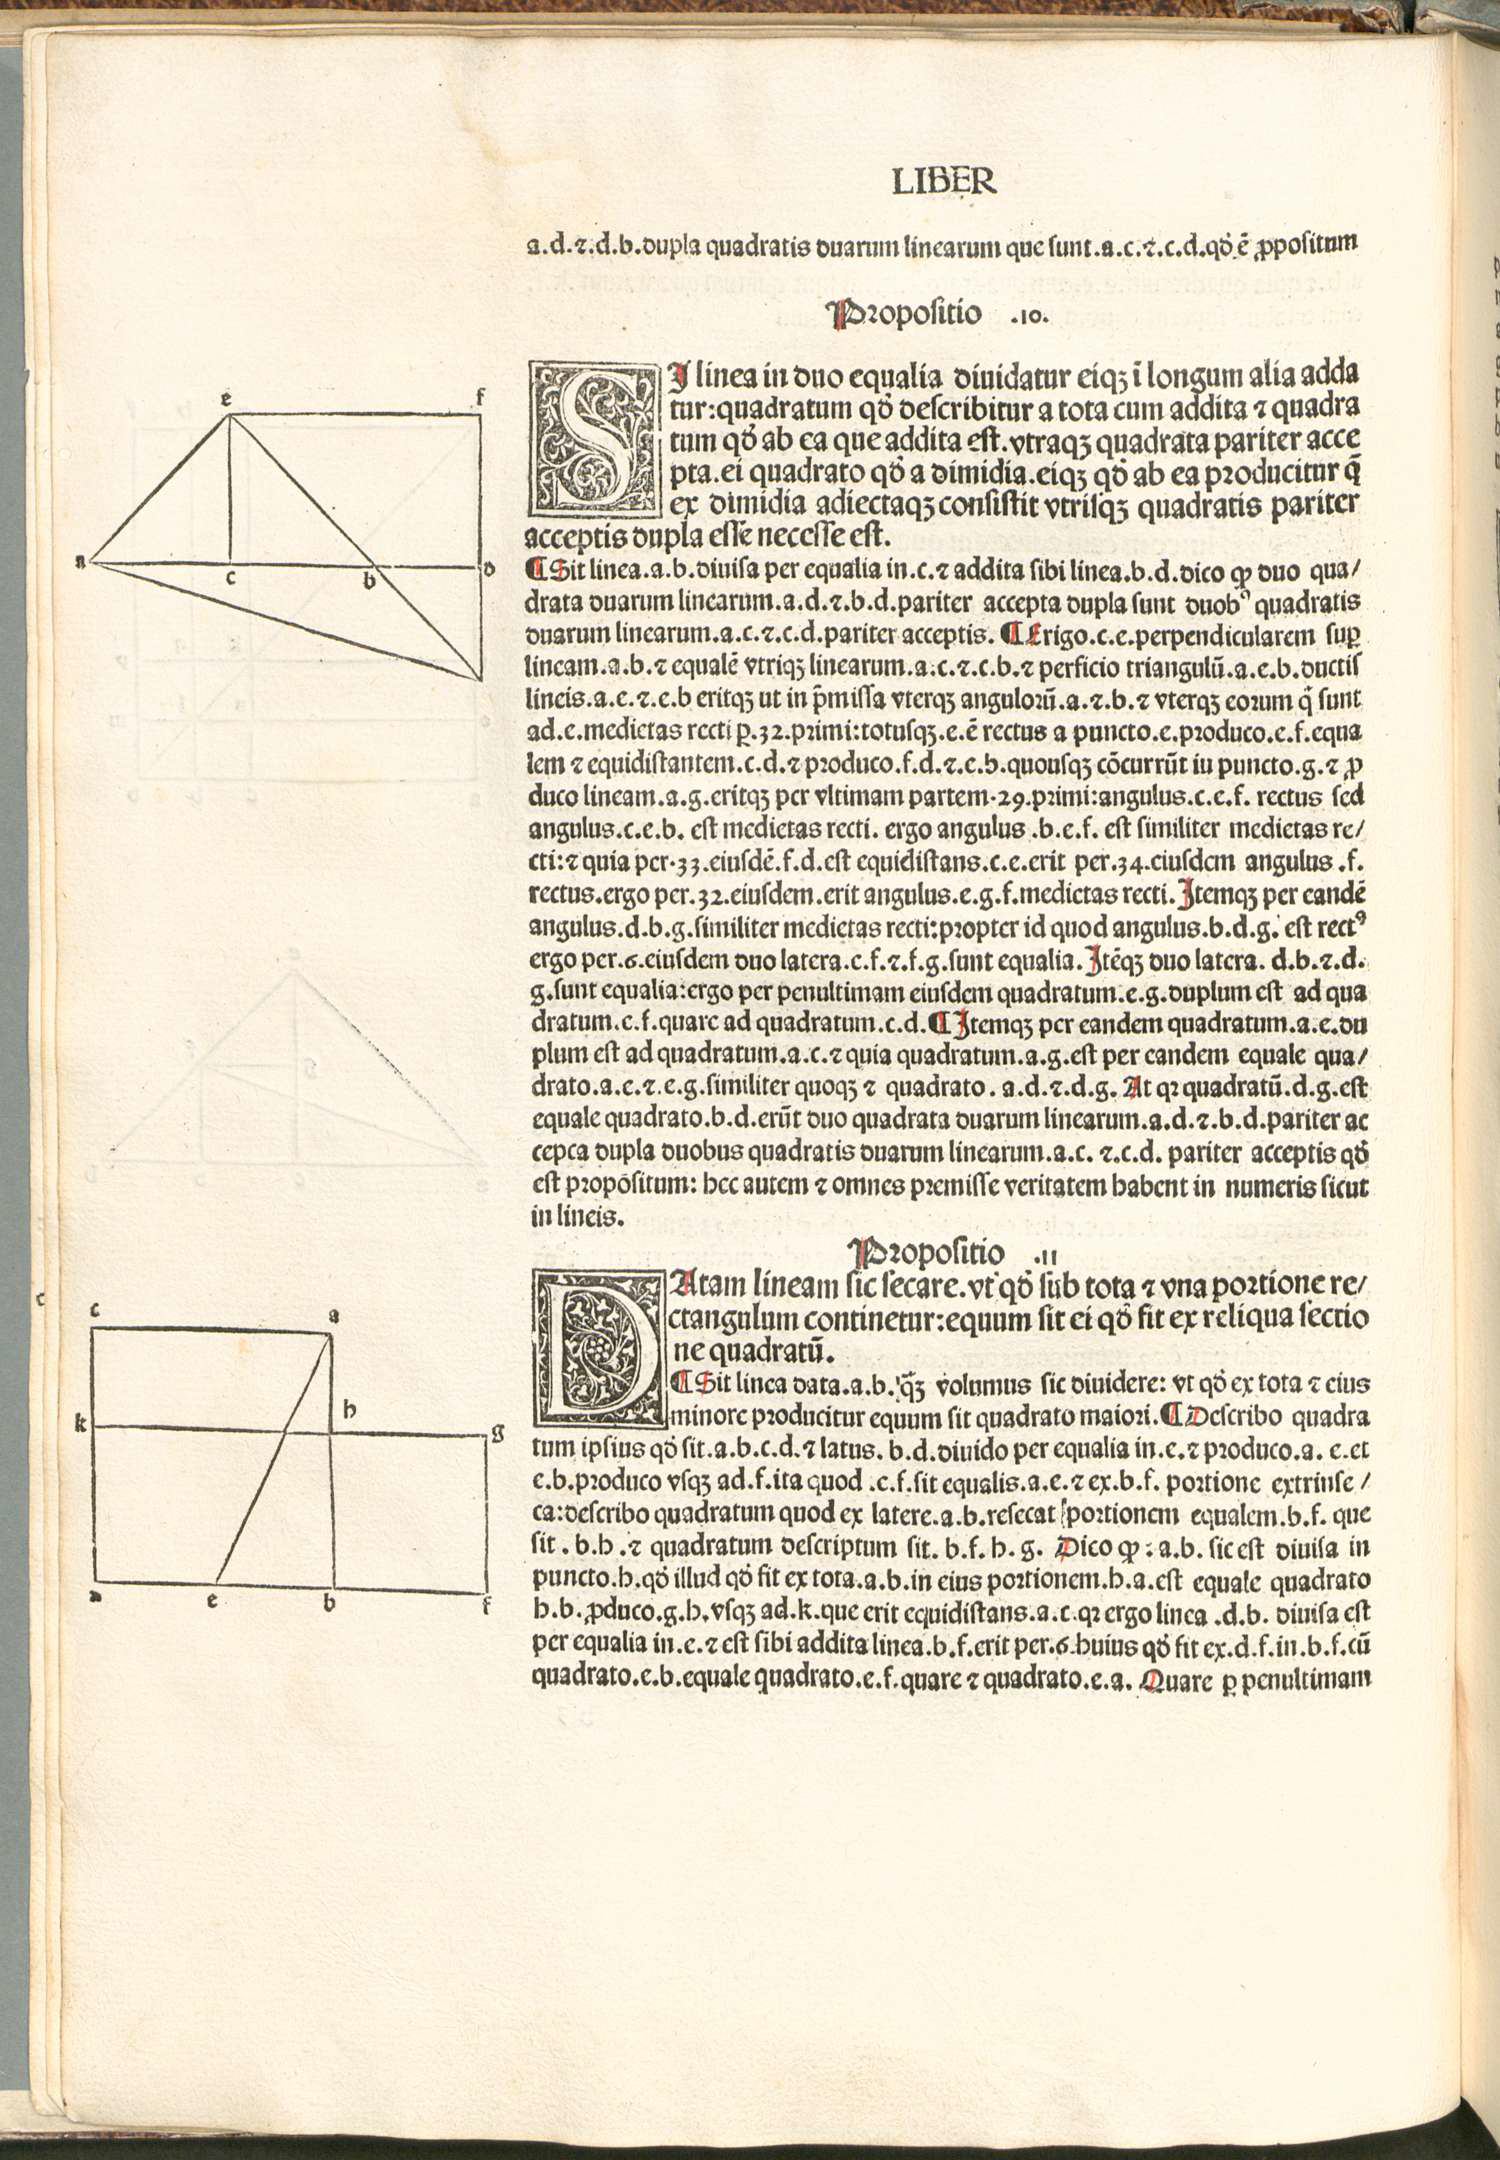 Detail of page from Euclid